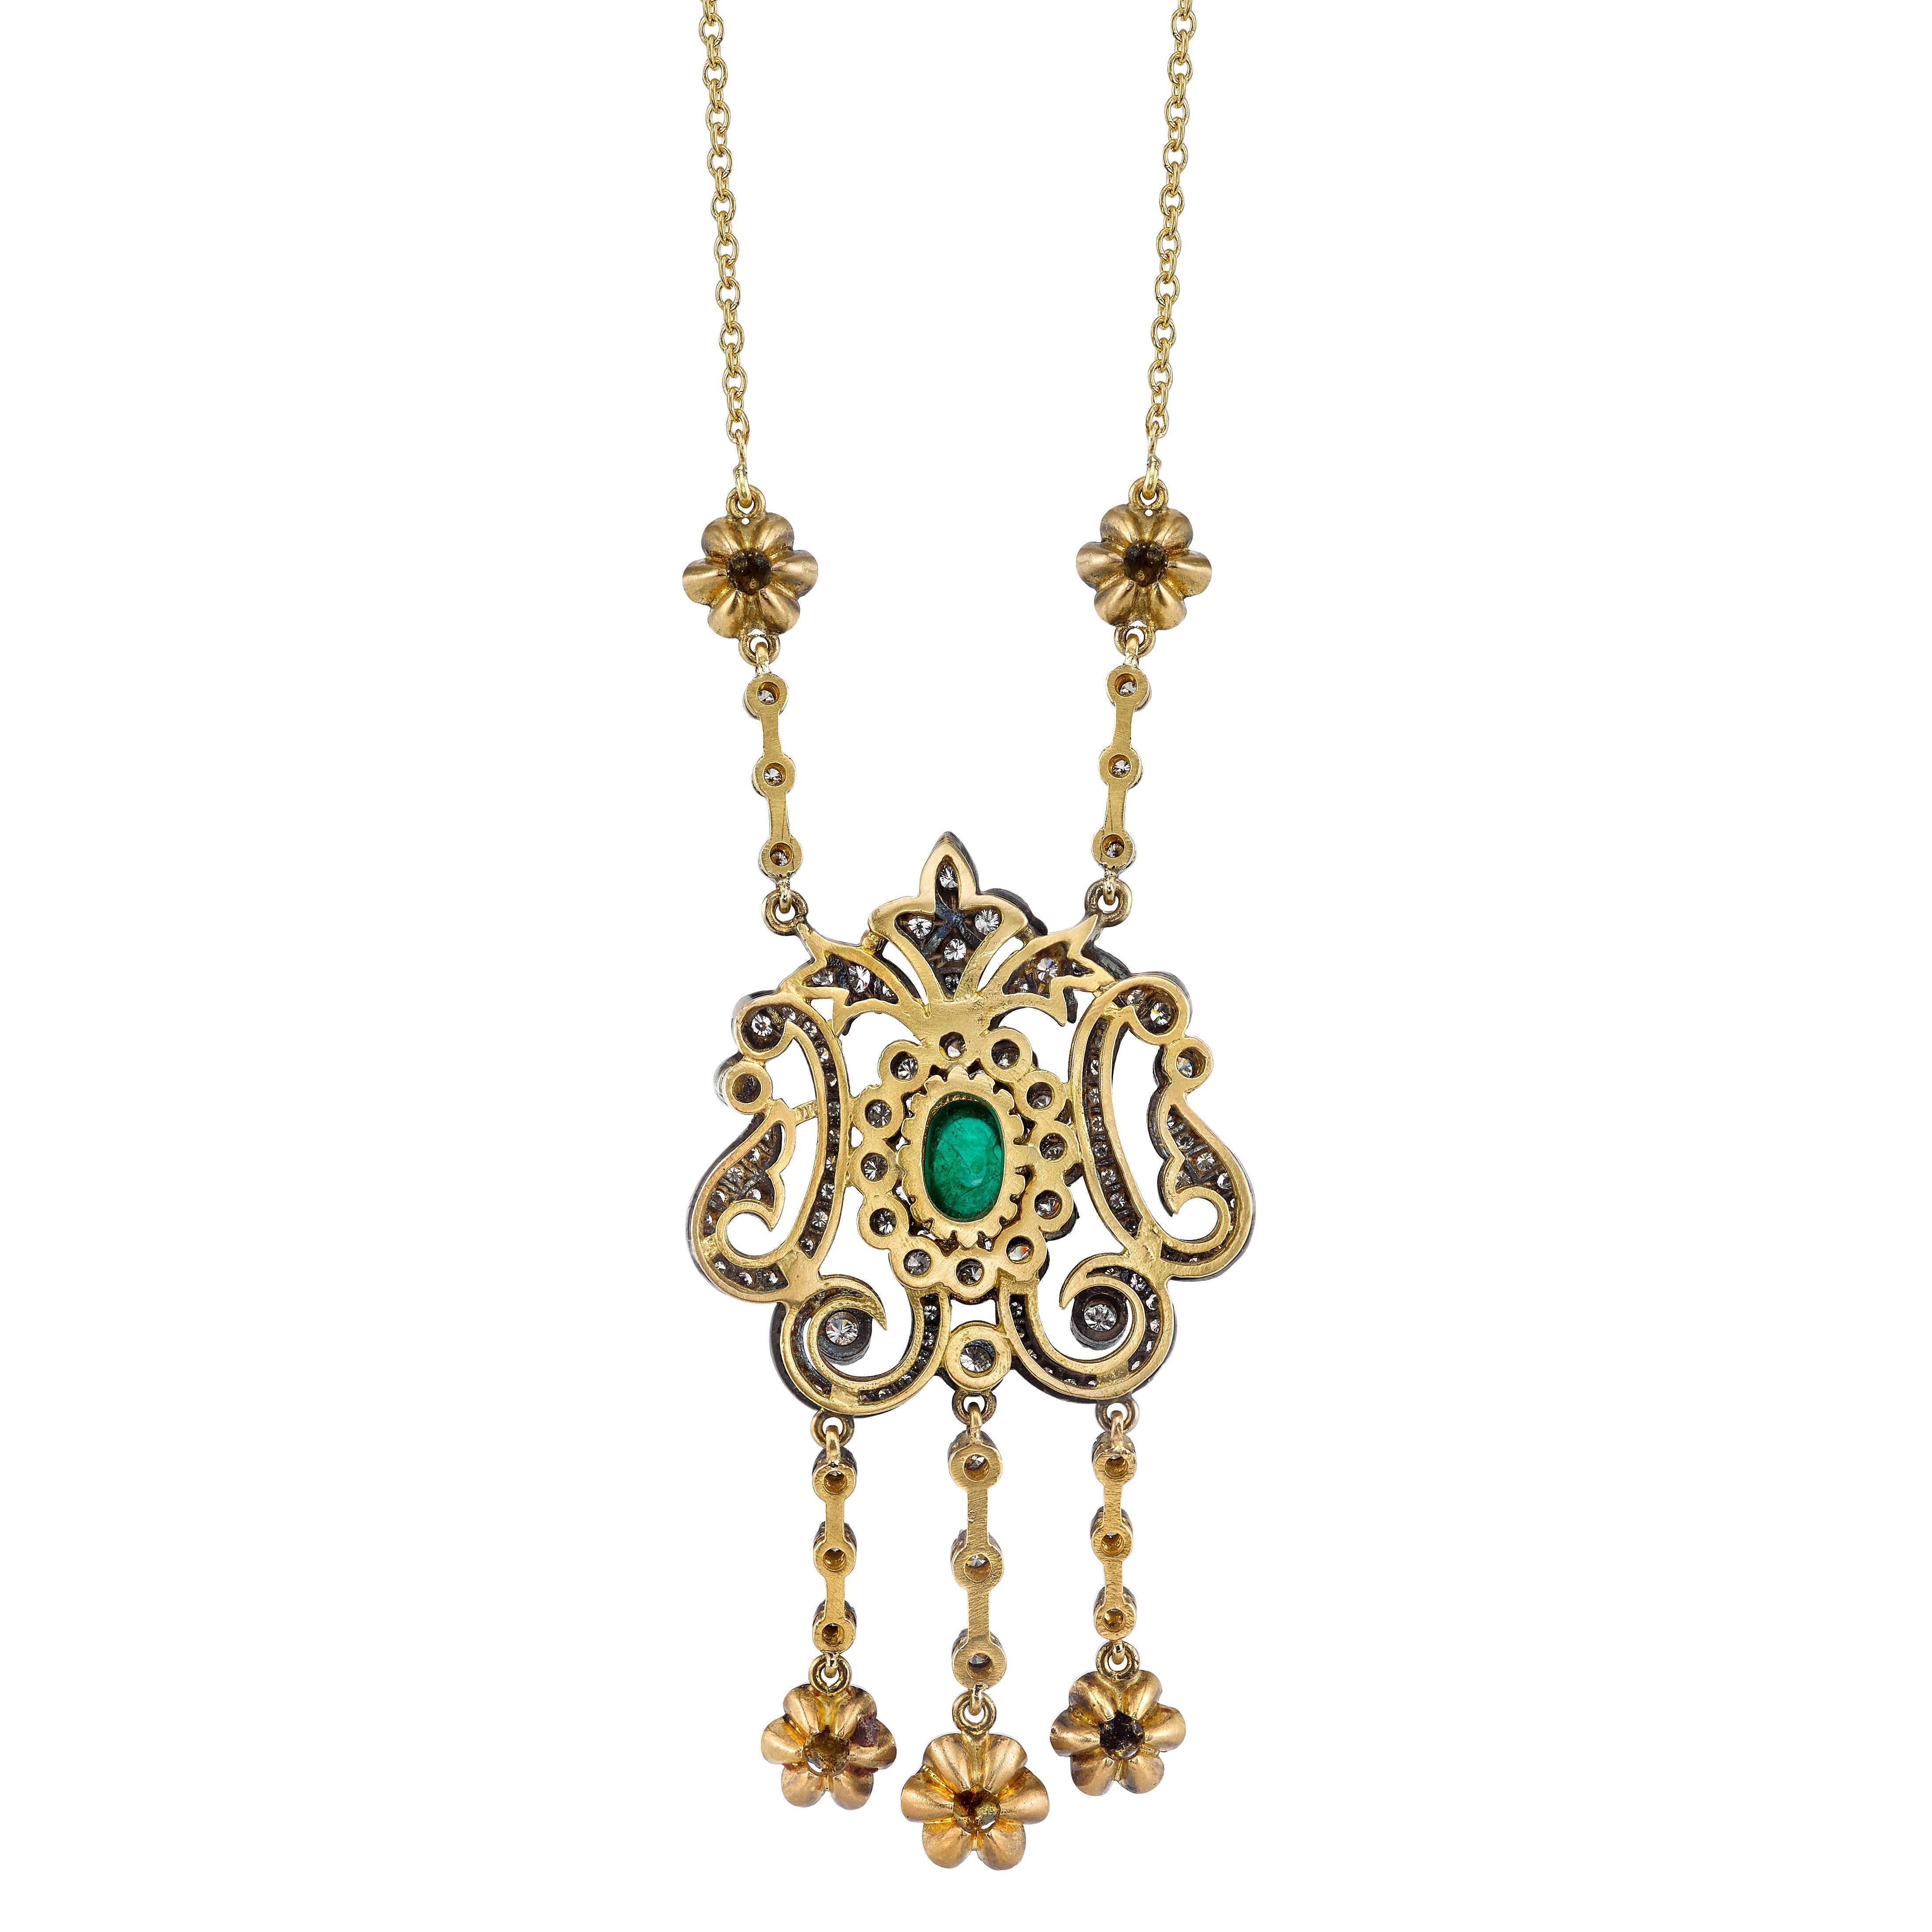 18 Karat Yellow Gold, 1.14 CT Center Oval Cabochon Emerald, 2.22 CT Round Brilliant and Rose Cut Diamonds, and Silver Patina. 

Inspired by the Edwardian Era, a time when fine jewelry was a crucial component of every outfit, pieces were created to